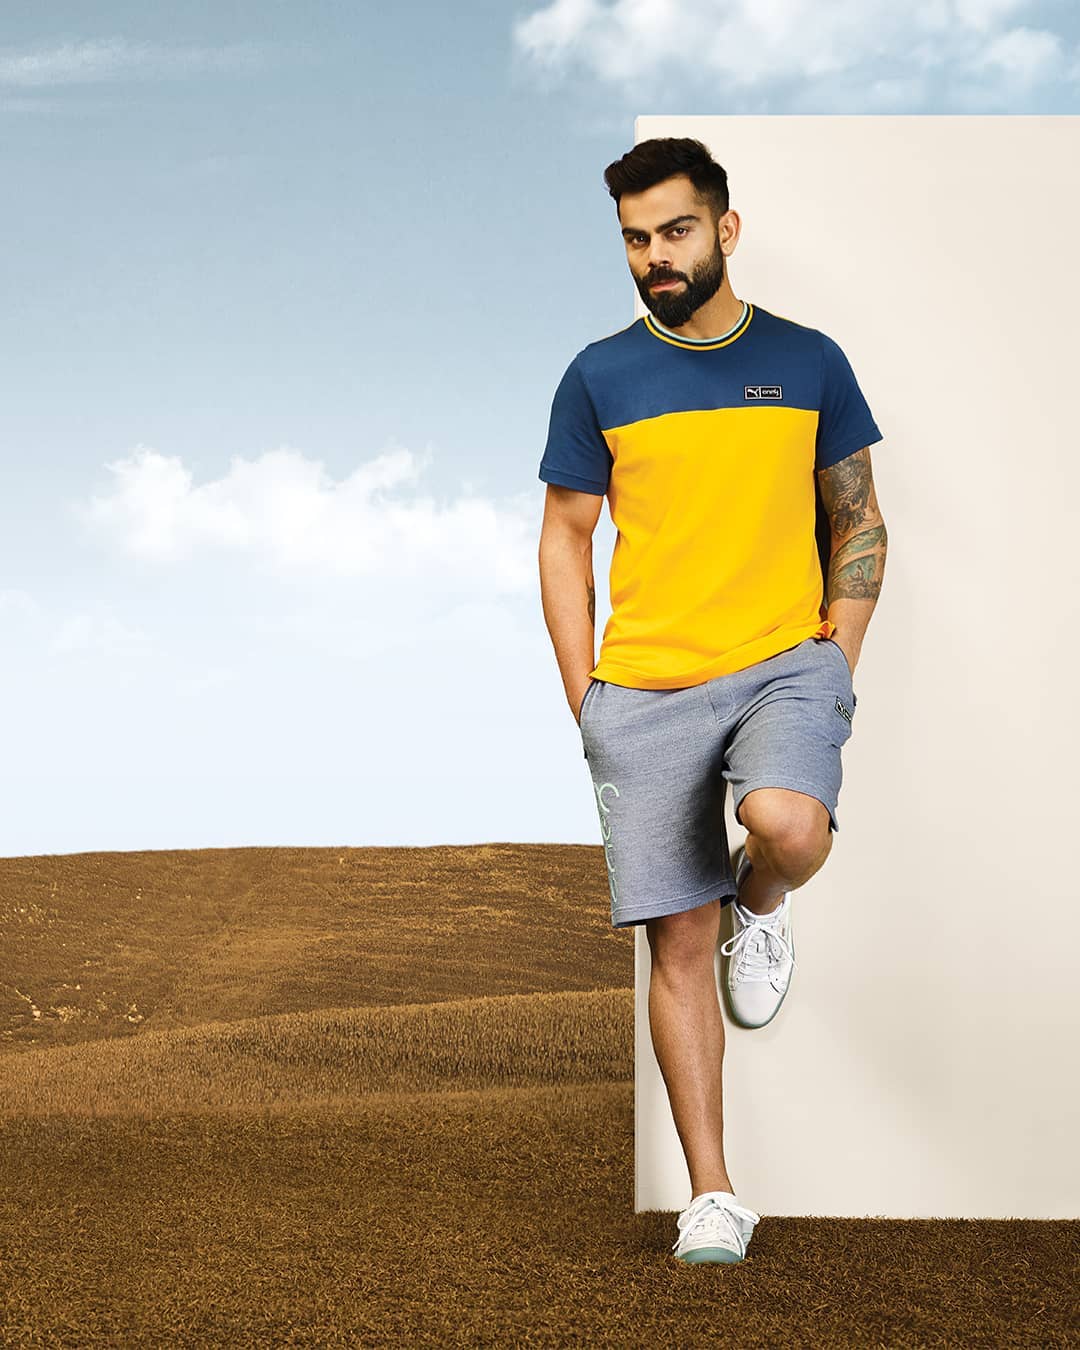 Lifestyle Store - Walk in style with the Basket Classic One8 from Puma, available at Lifestyle!
.
Shop ONLINE and Get UPTO 50% OFF!
.
Tap on the image to SHOP NOW!
. 
#LifestyleStores #FreshFashion #N...